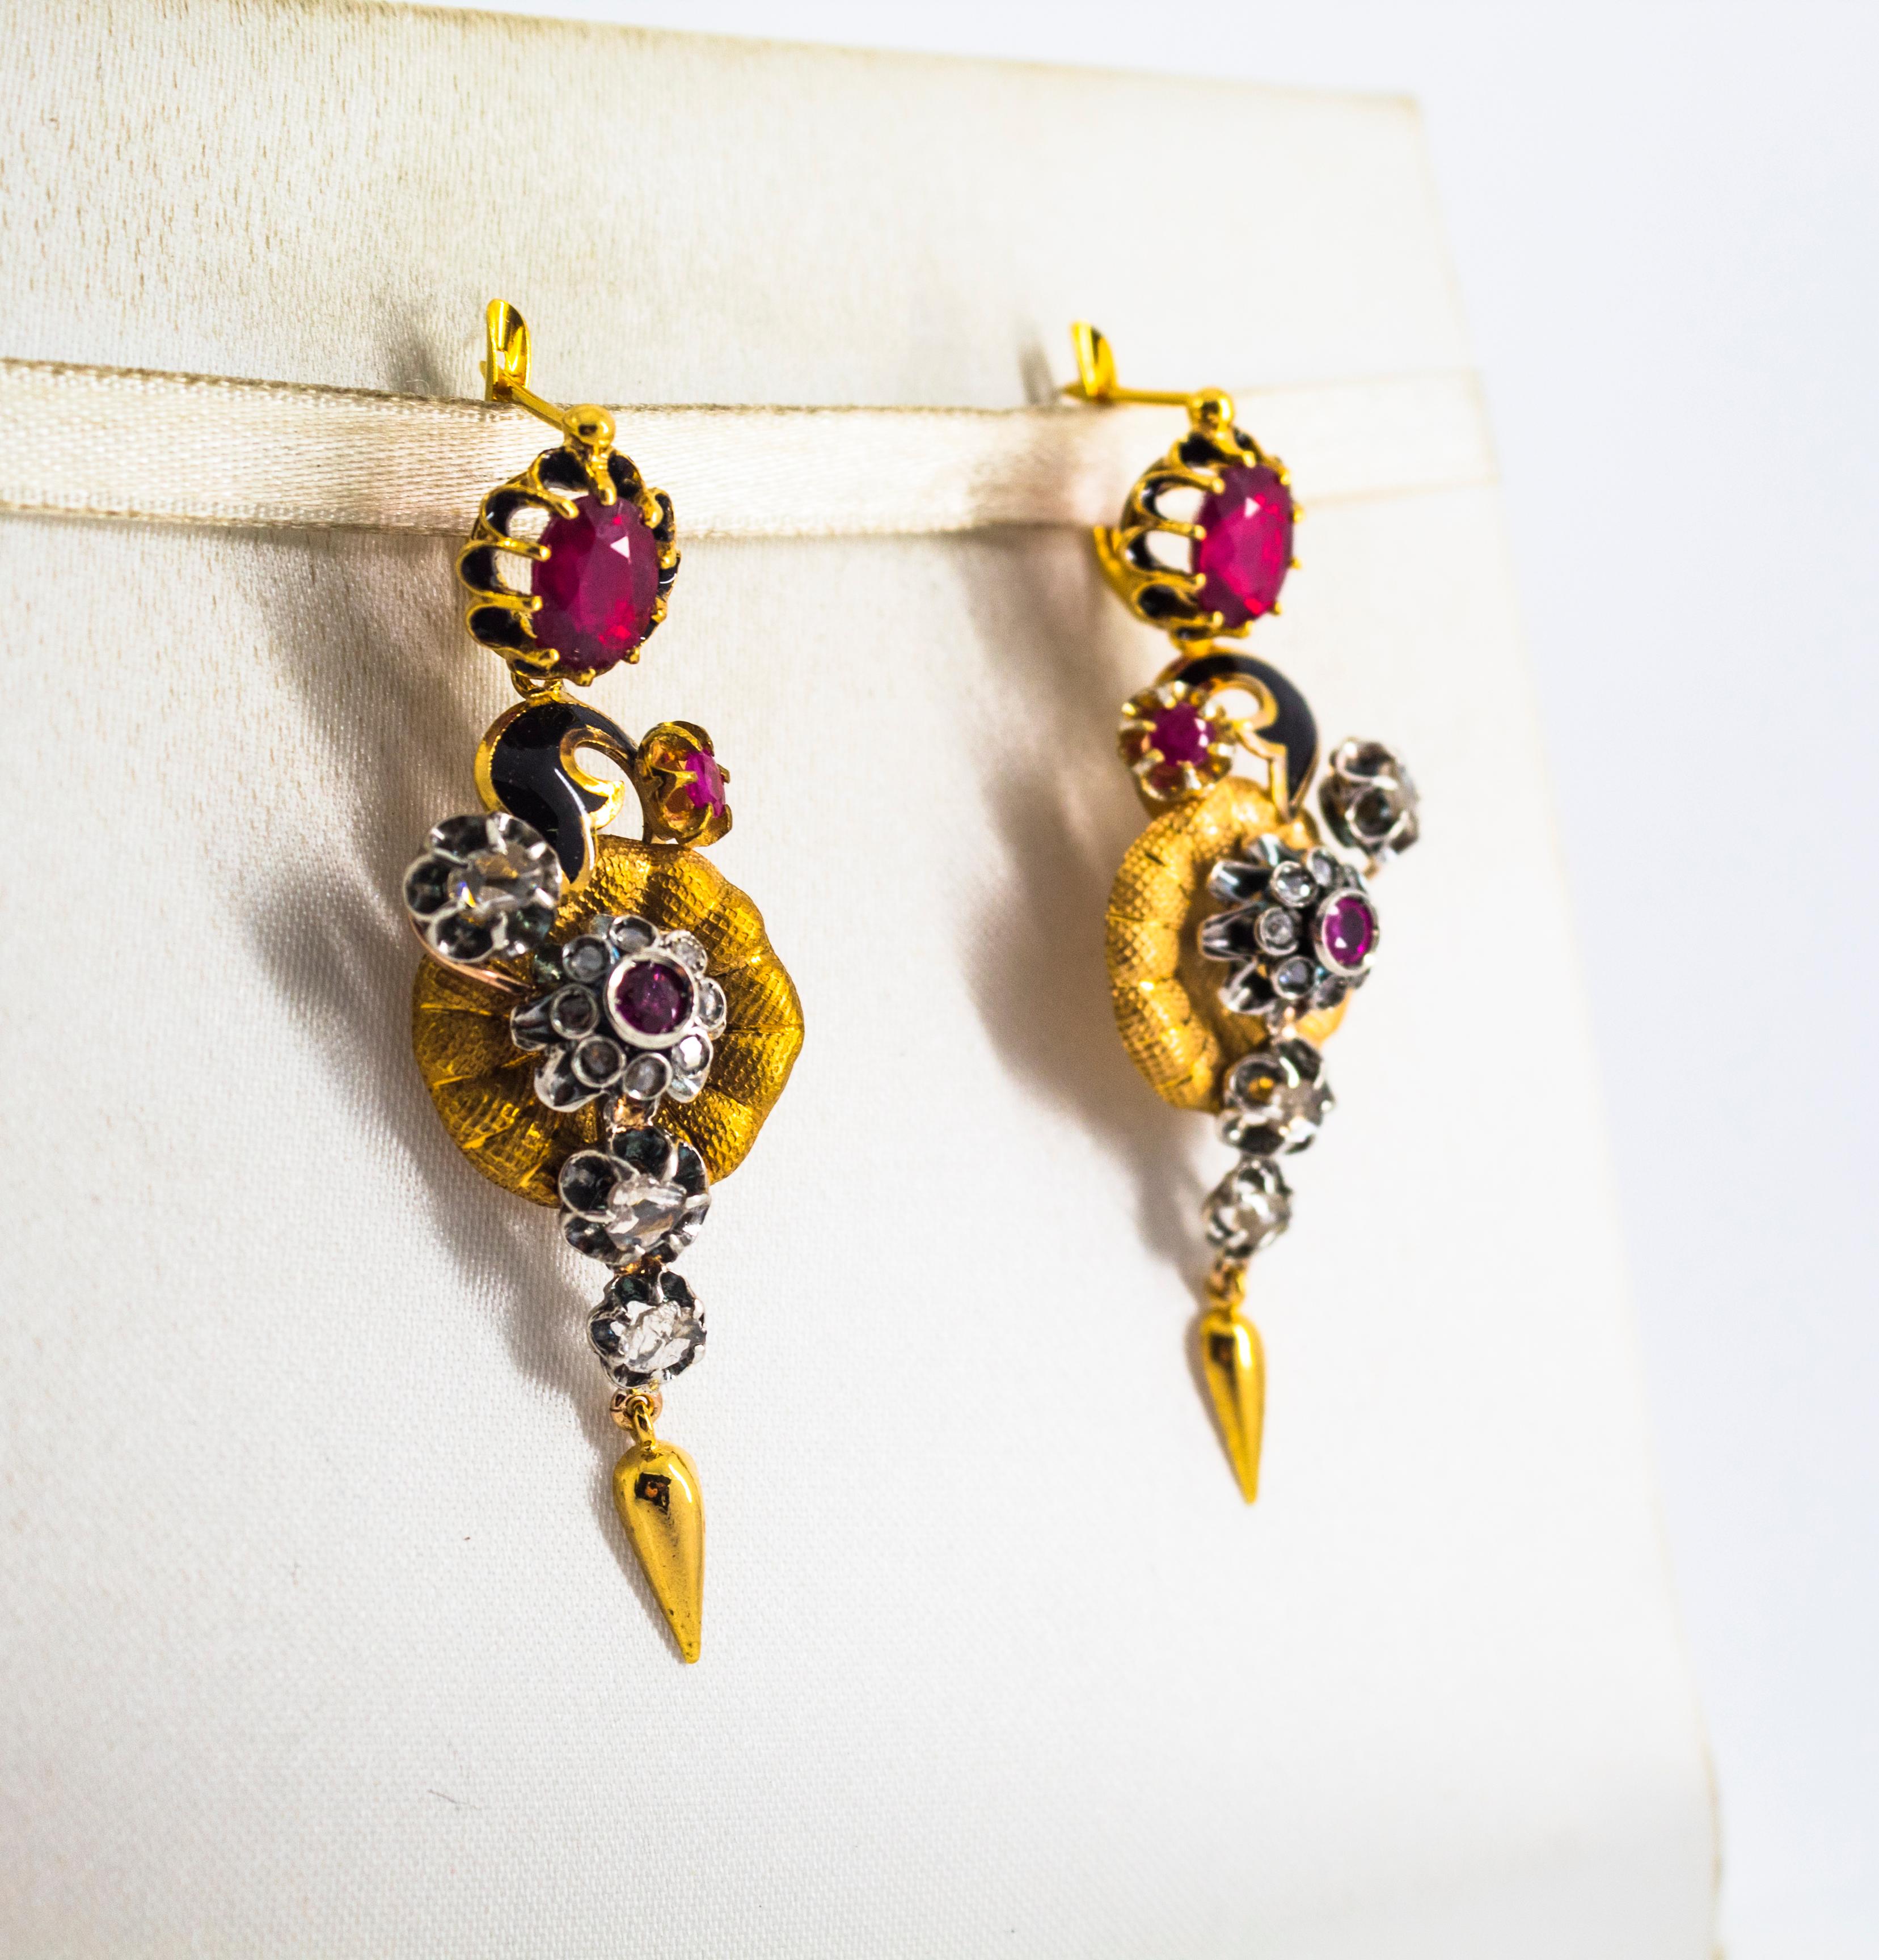 These Lever-Back Earrings are made of 9K Yellow Gold and Sterling Silver.
These Earrings have 1.10 Carats of White Rose Cut Diamonds.
These Earrings have 3.00 Carats of Rubies.
These Earrings have also Black Enamel.
All our Earrings have pins for